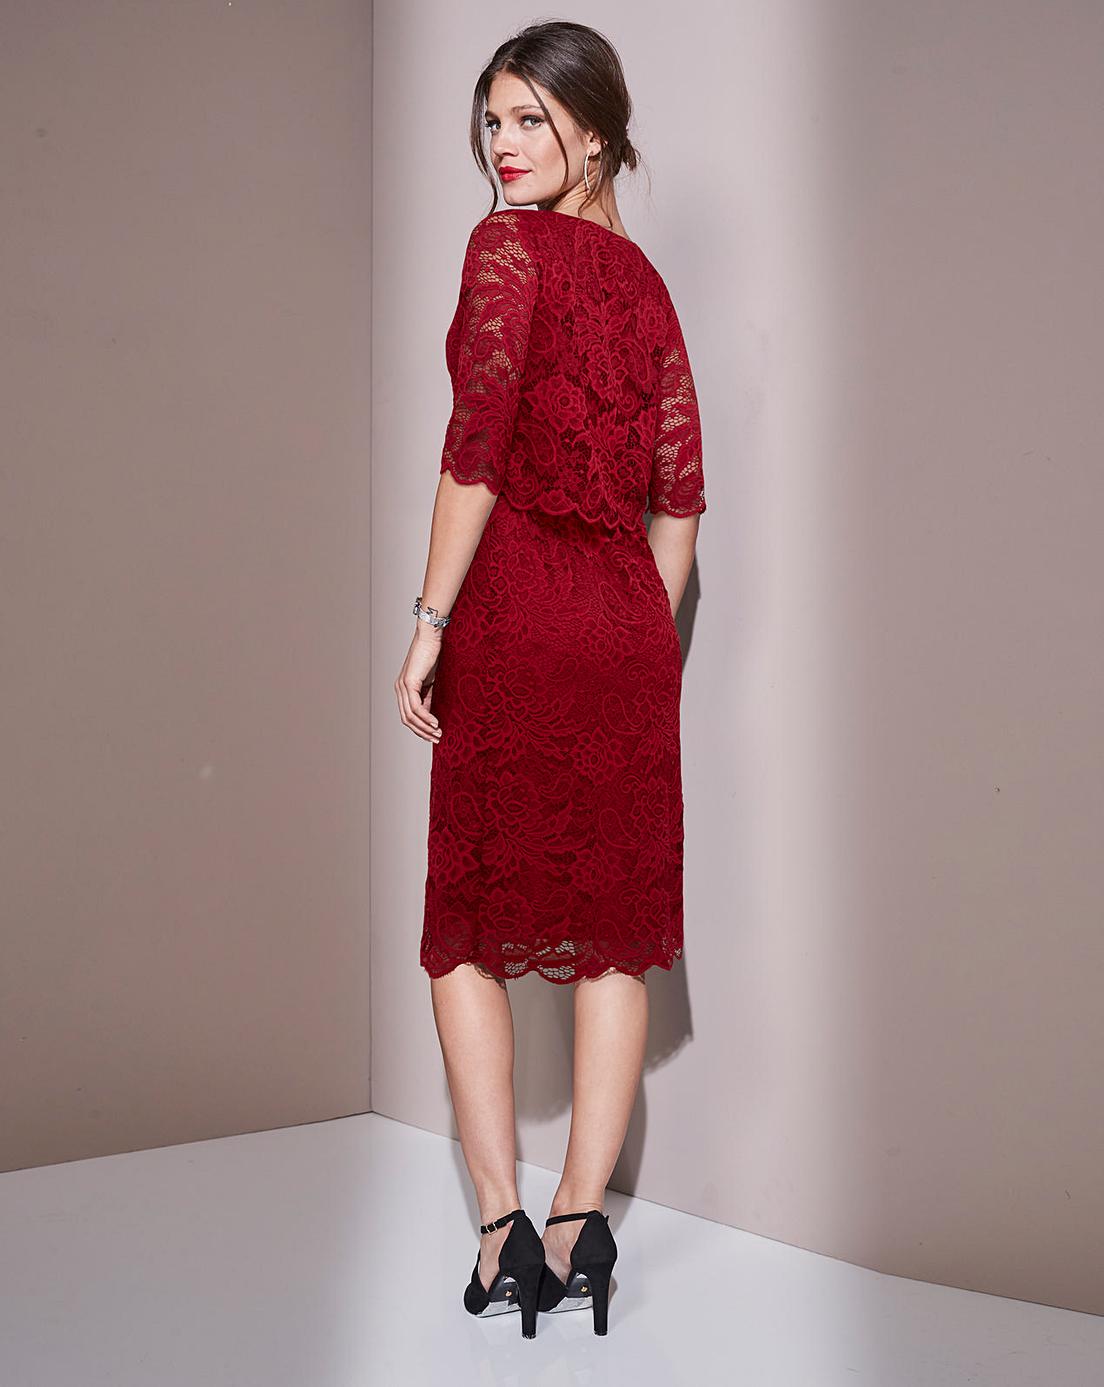 Changes by together lace dress